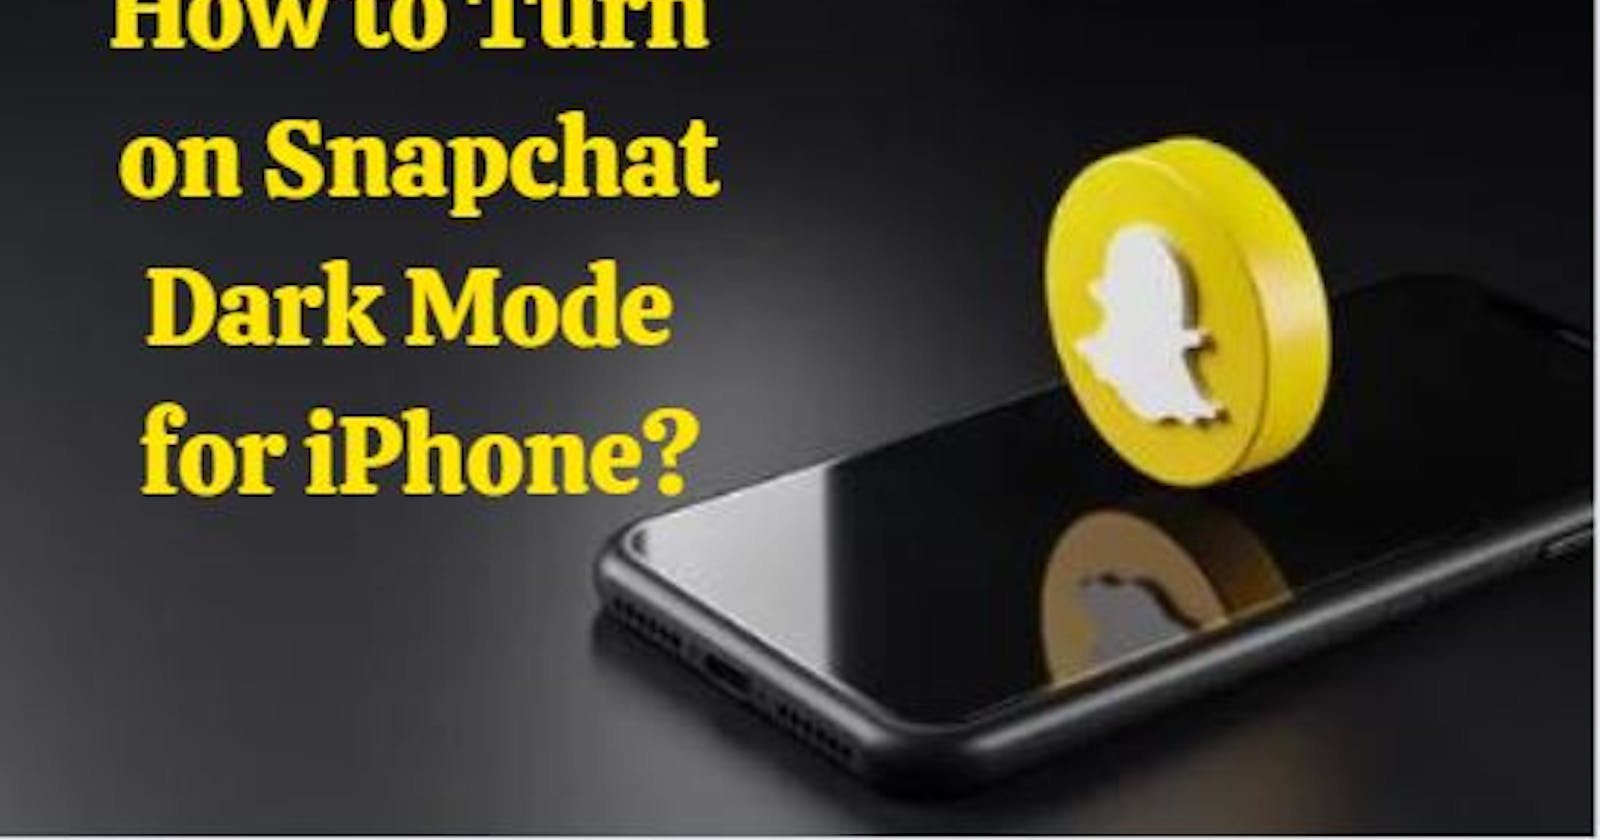 How to Turn on Snapchat Dark Mode for iPhone?